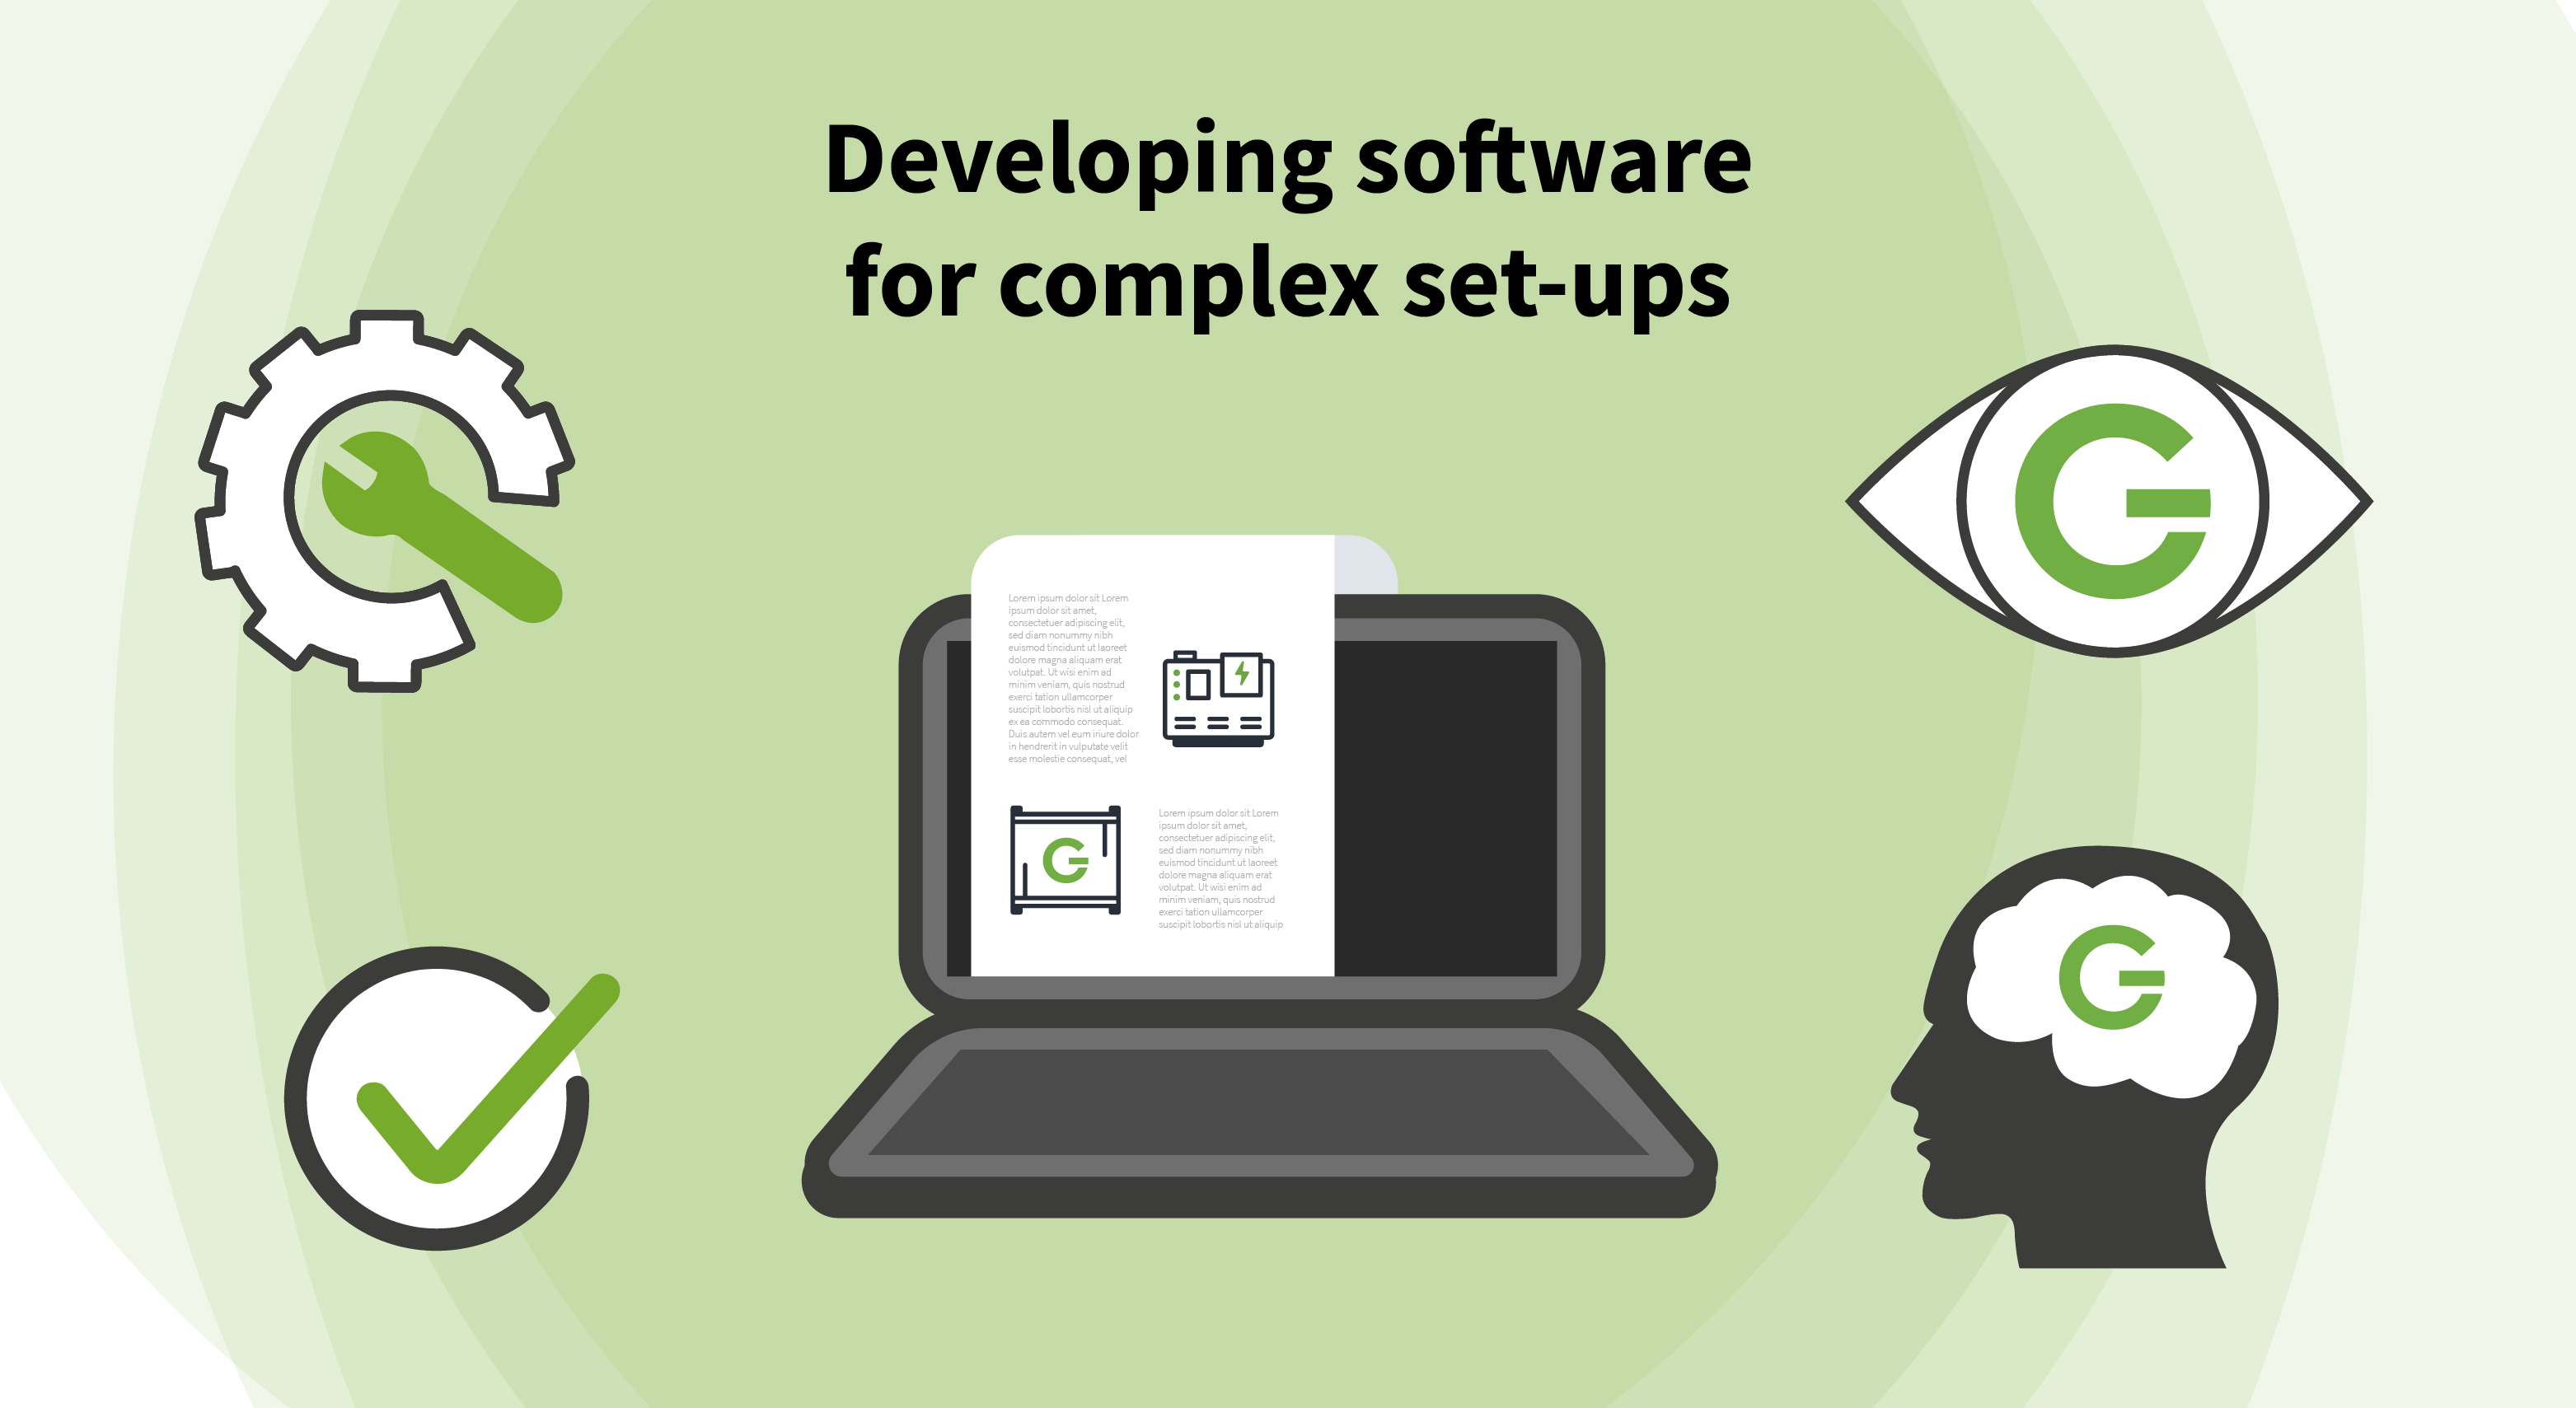 Learn about complex set-ups and how we develop them